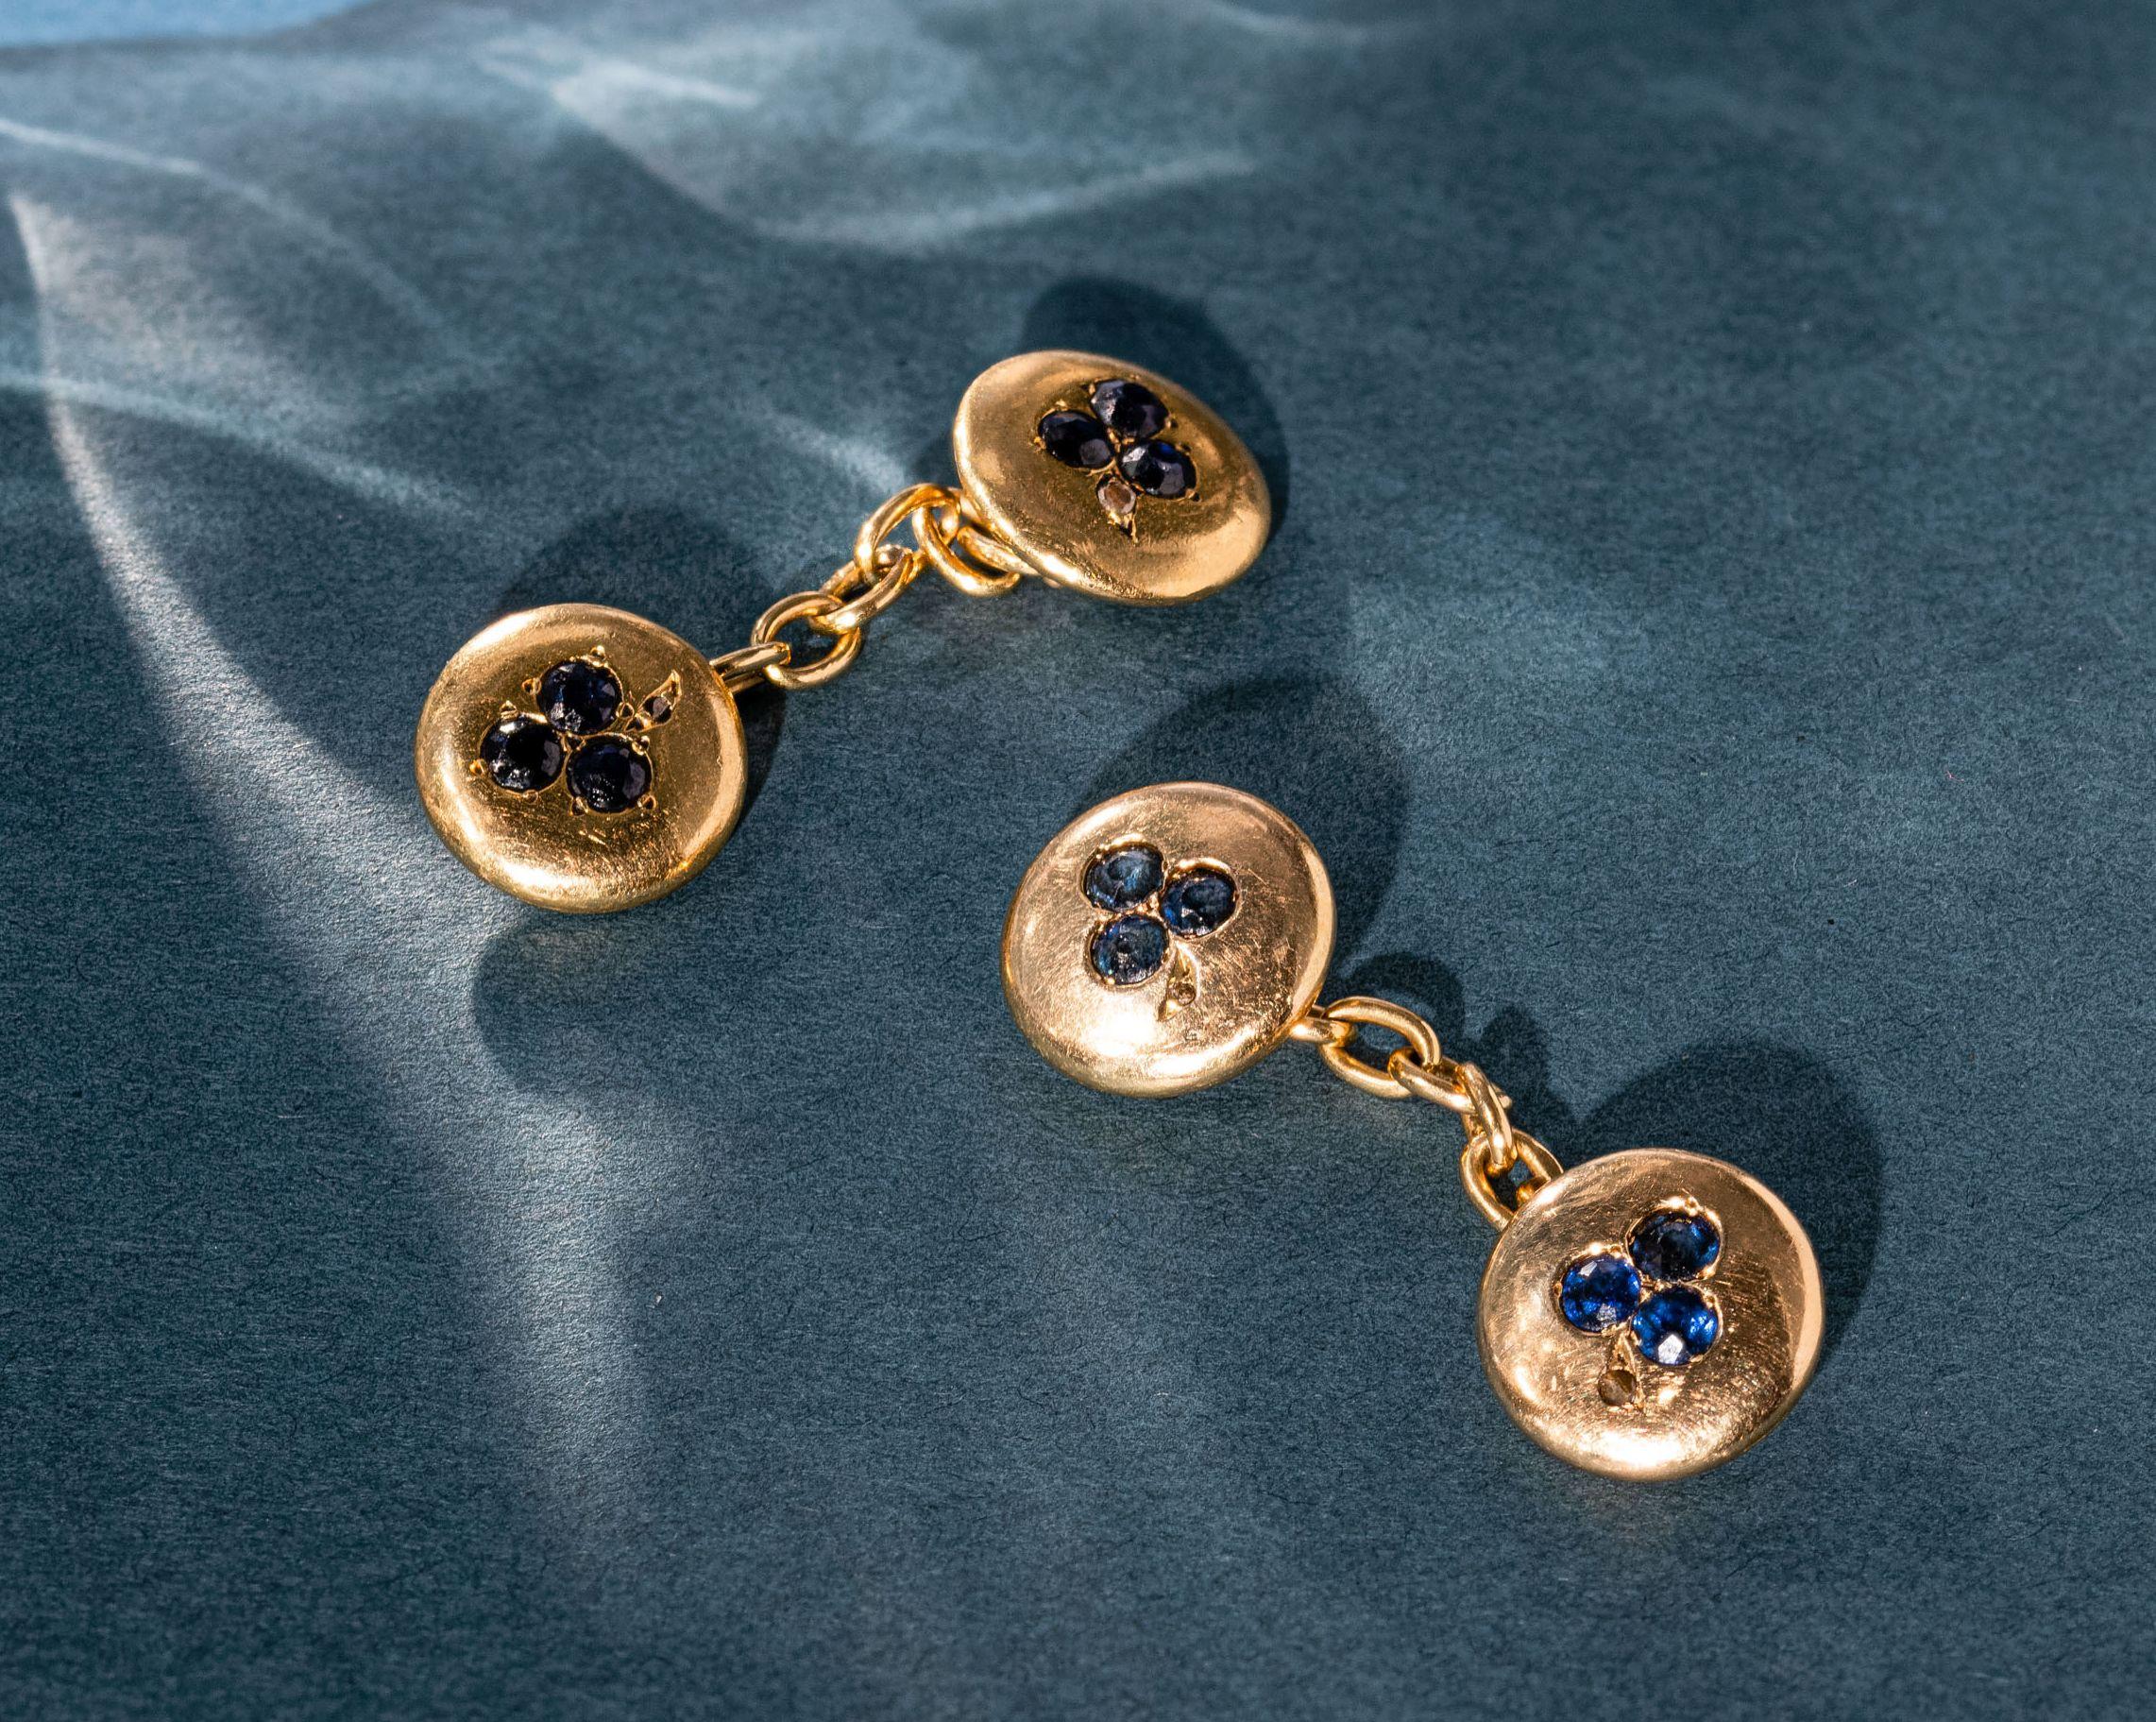 Delicate pair of golden cufflinks set with circular-cut sapphires and rose-cut diamonds in a clover motif.
Late 19th century, french import assay marks.
These lovely cufflinks complement any ensemble.